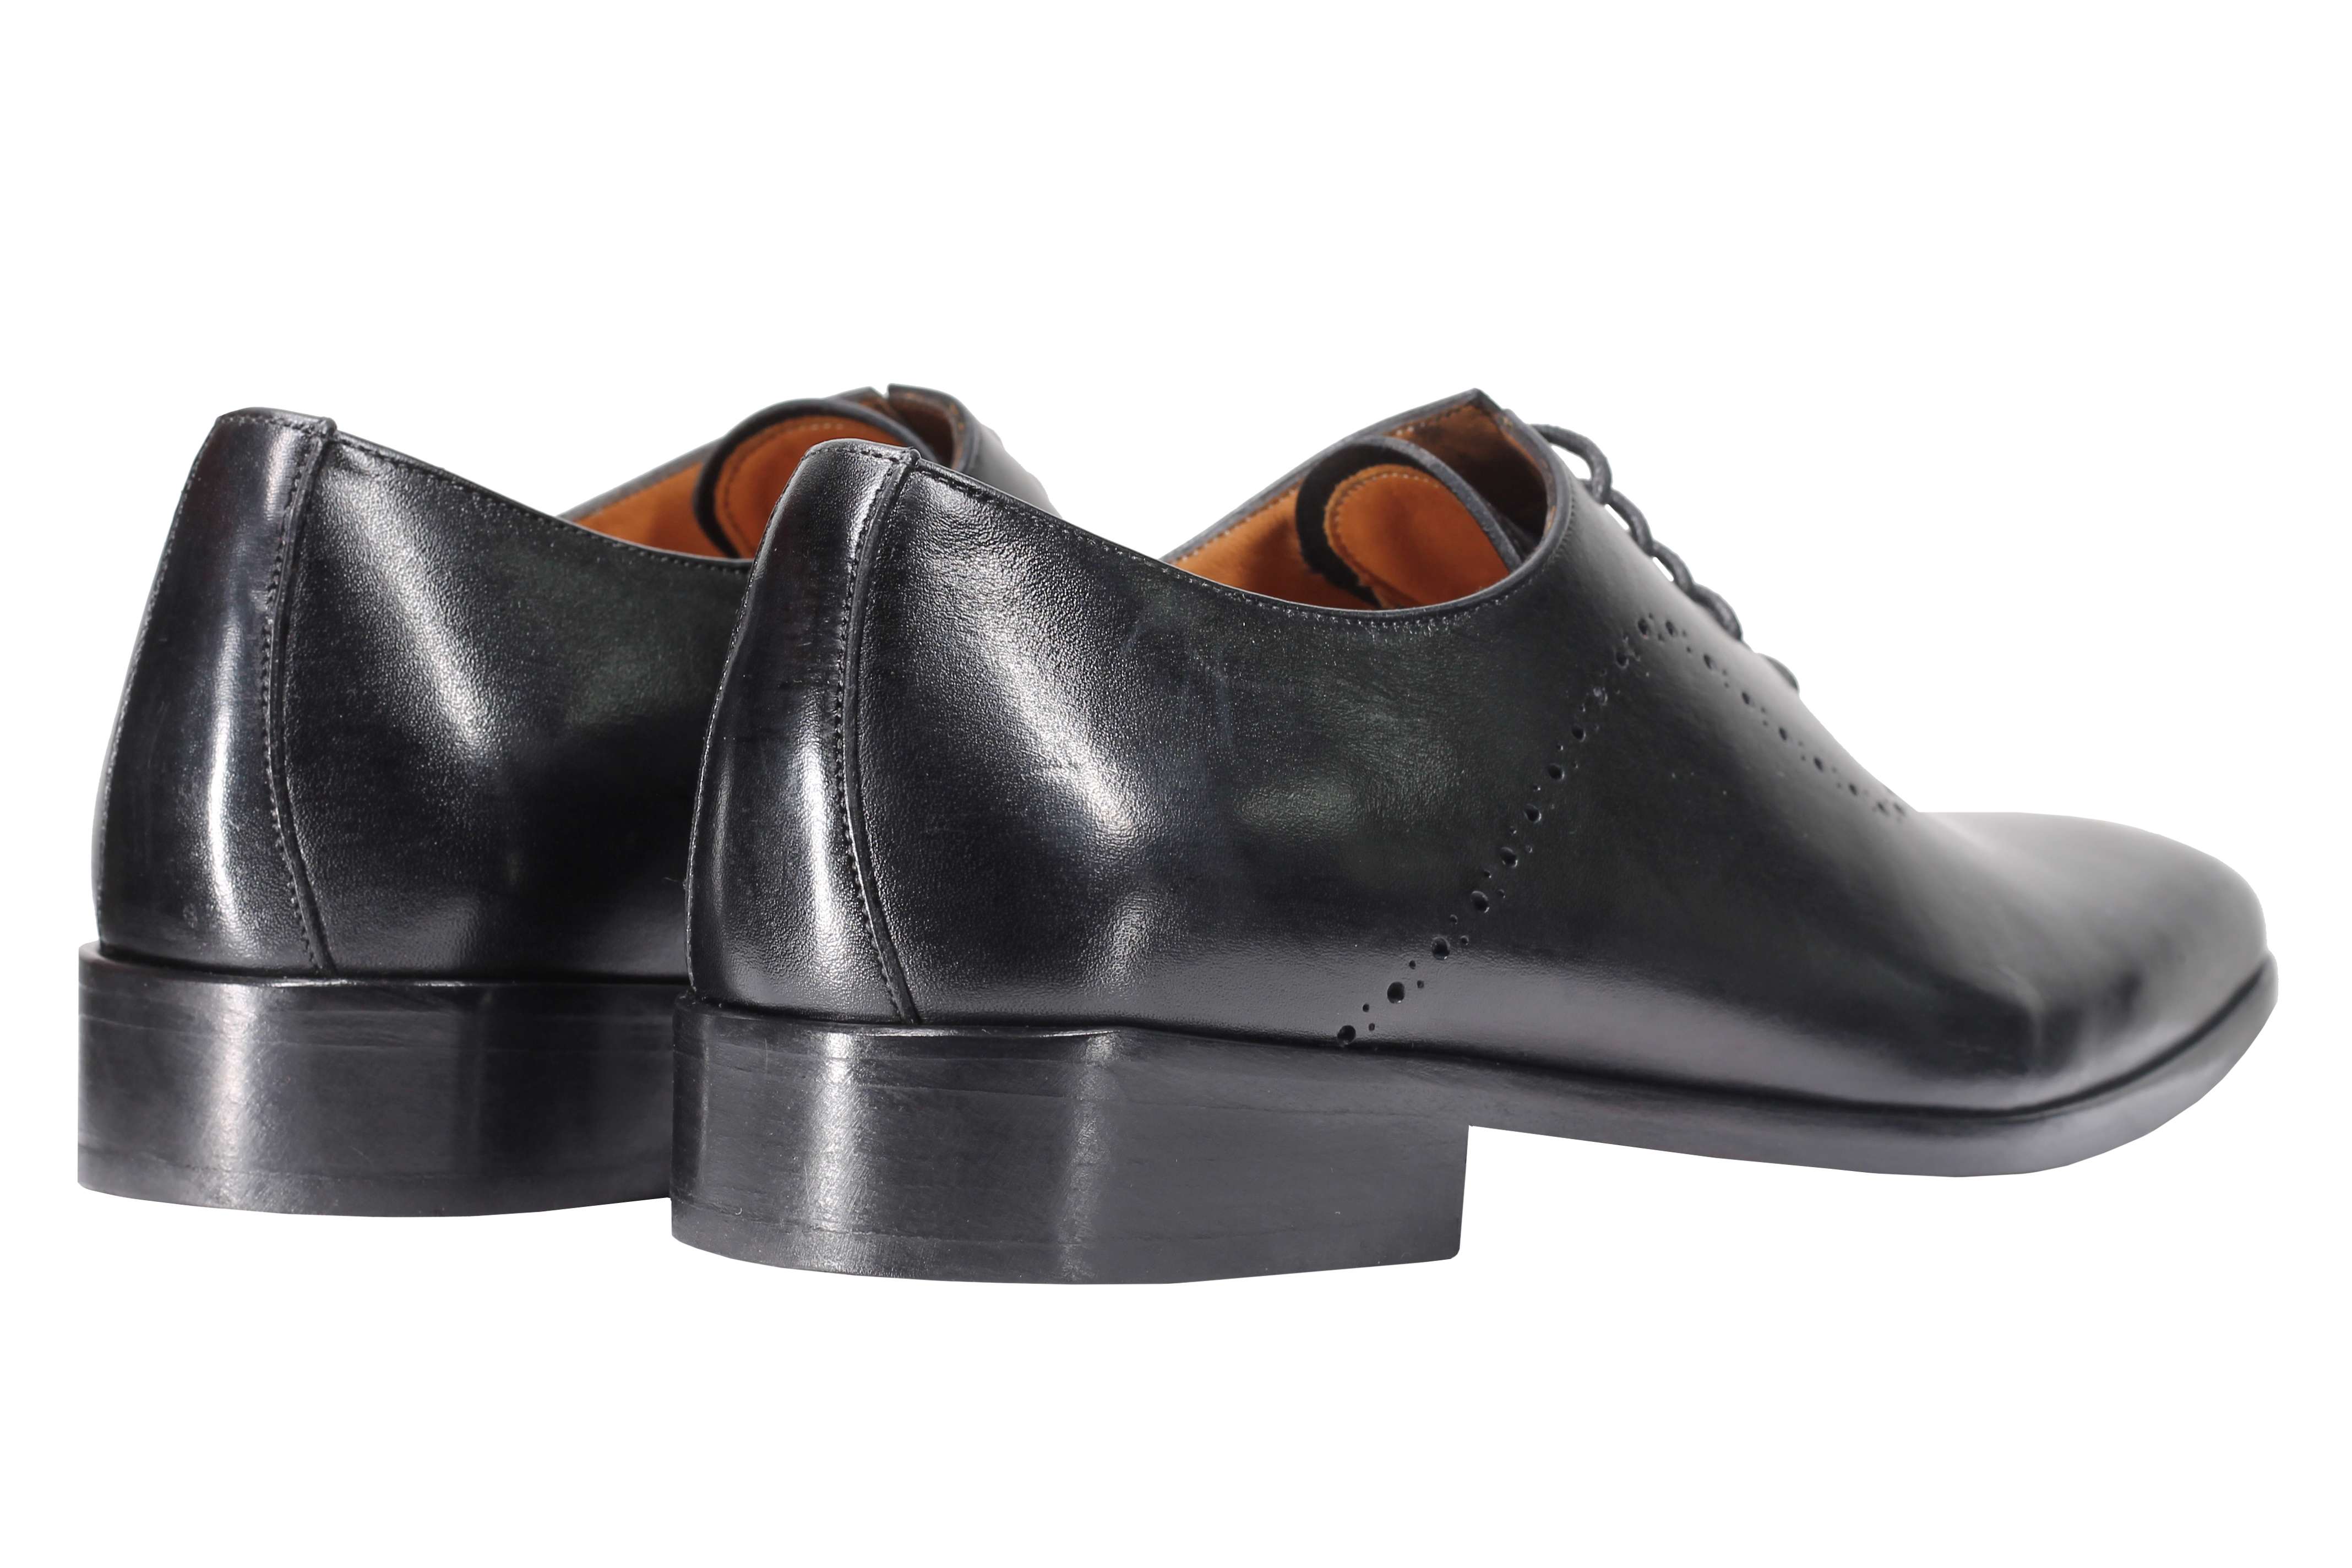 BLACK CALF LEATHER OXFORD LACE UP BROGUE SHOES